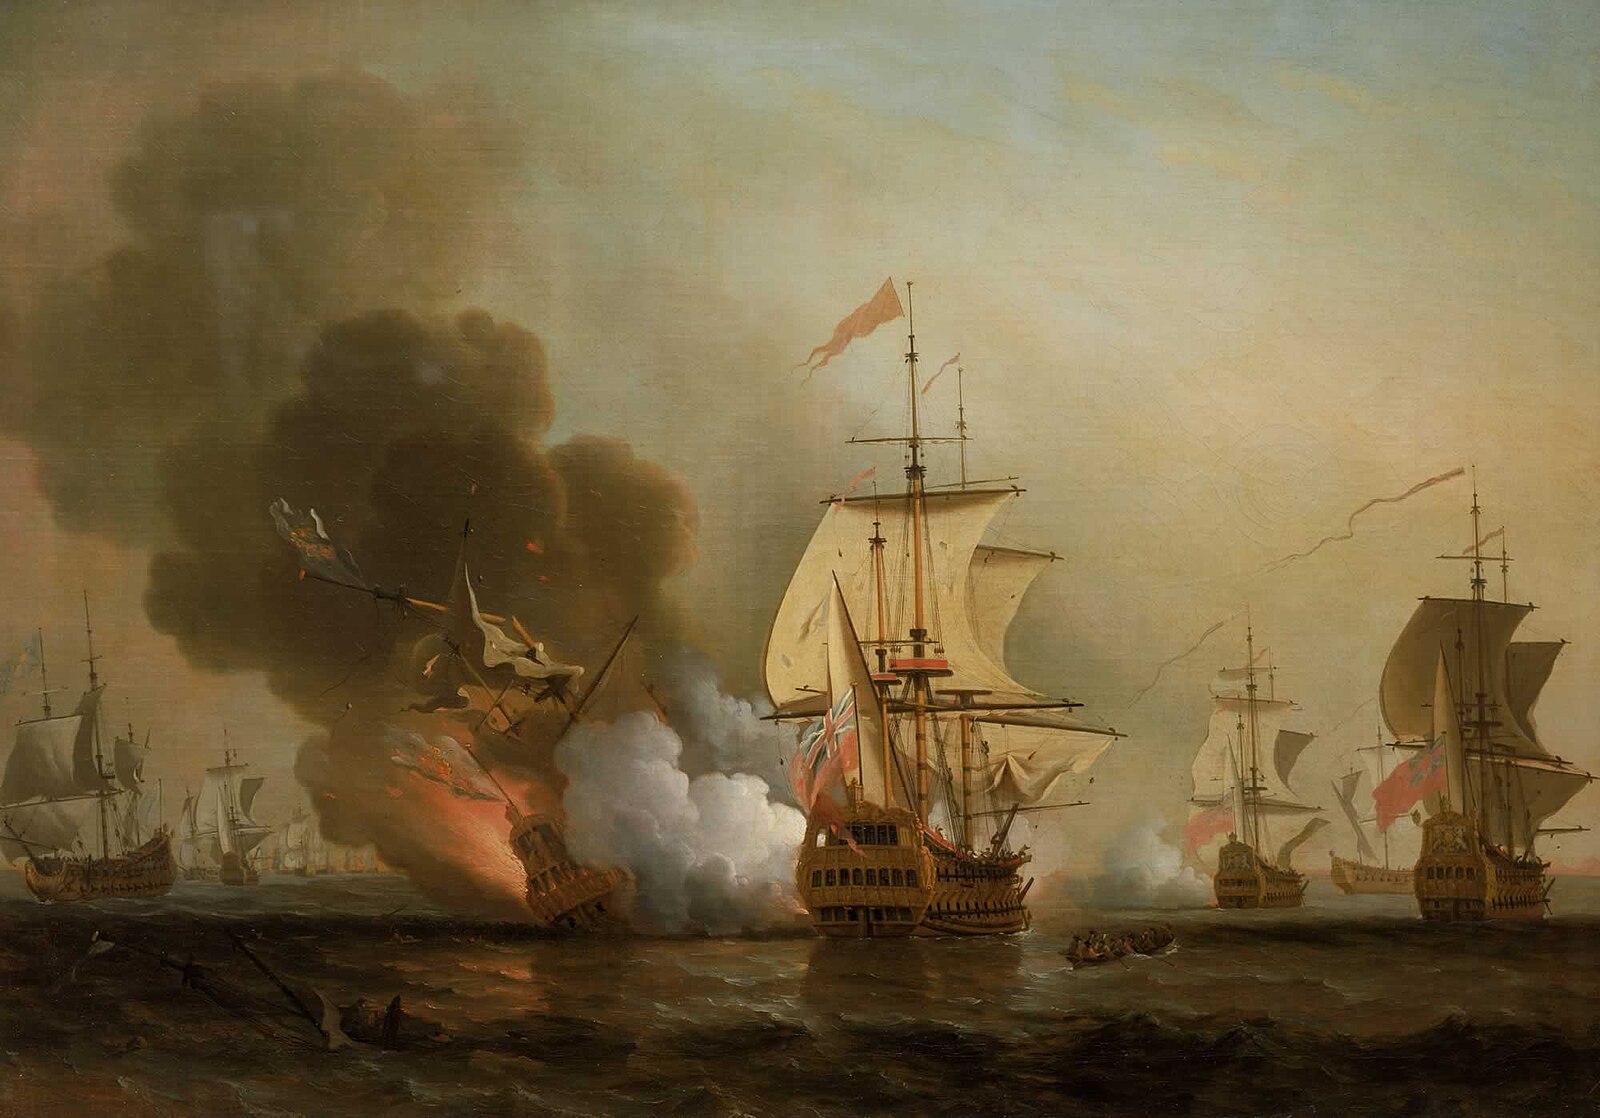 "Wager's Action off Cartagena" by Samuel Scott (1702-1772), which depicts the battle that sank San José